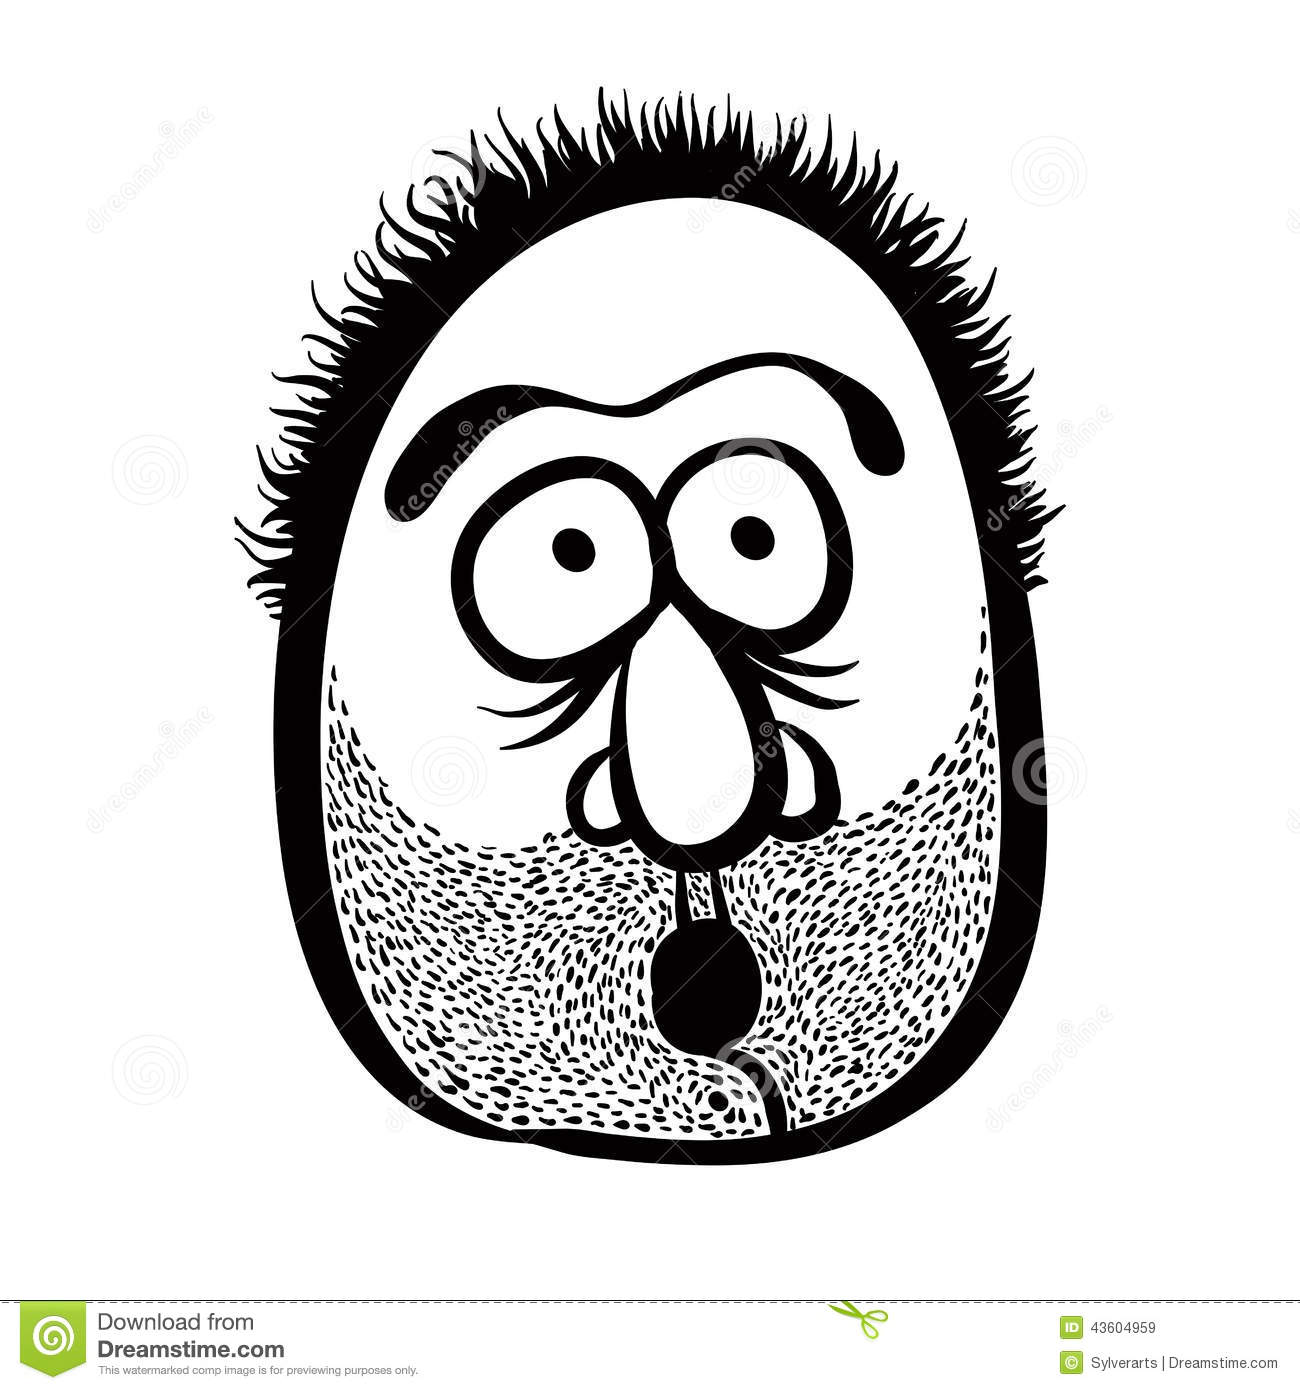 Funny Cartoon Face With Stubble, Black And White Lines Vector Il.